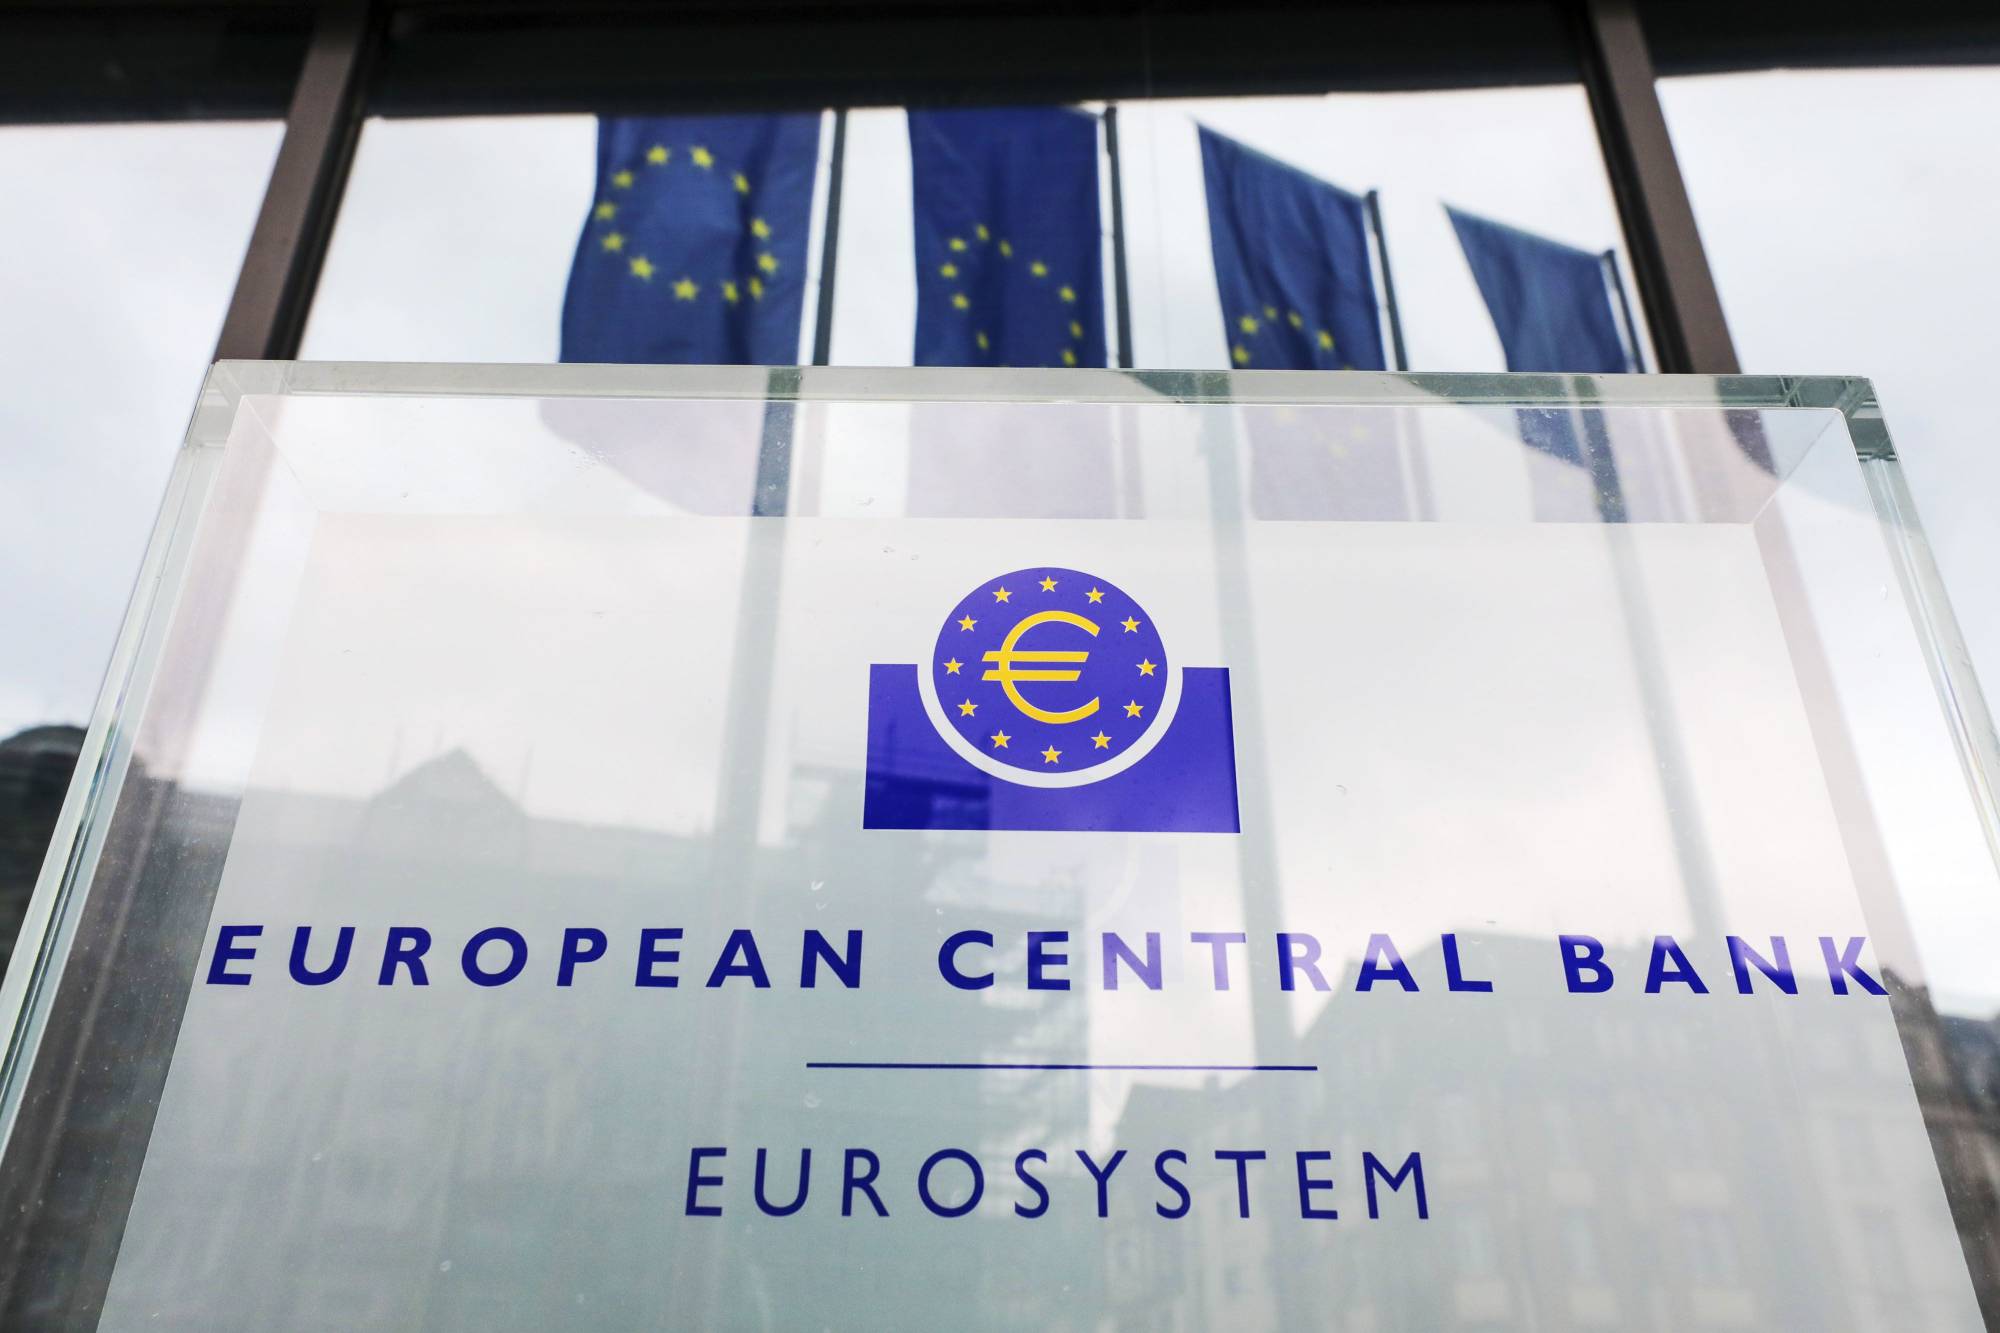 The European Central Bank’s president says the lender believes inflation is a temporary problem that will clear up once supply bottlenecks are overcome. | BLOOMBERG